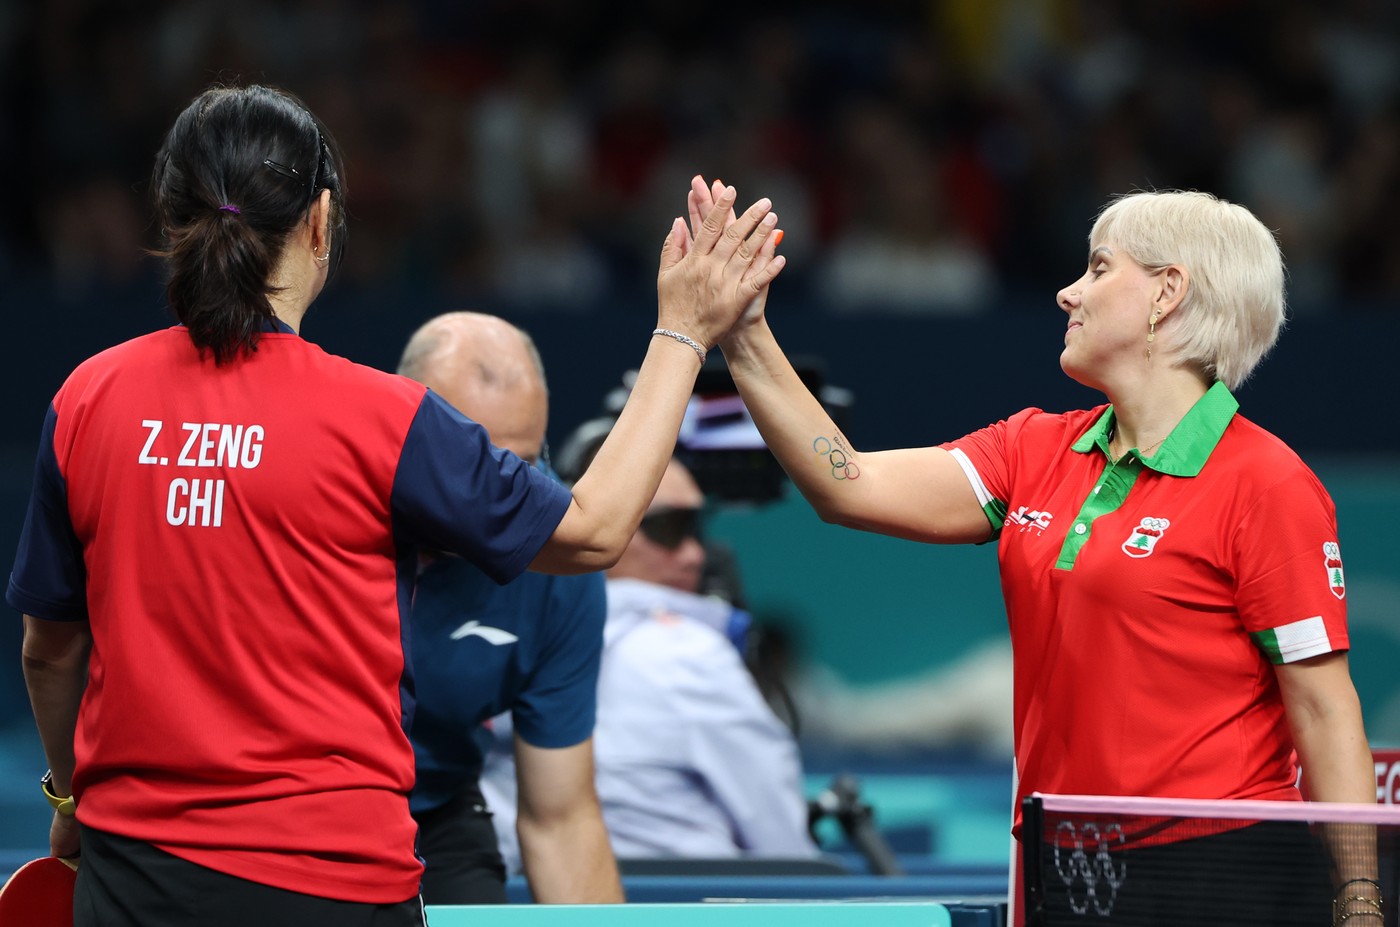 PARIS, July 27, 2024  -- Zeng Zhiying (L) of Chile interacts with Mariana Sahakian of Lebanon after their women's singles preliminary round table tennis match at the Paris 2024 Olympic Games in Paris, France, on July 27, 2024.,Image: 893131969, License: Rights-managed, Restrictions: , Model Release: no